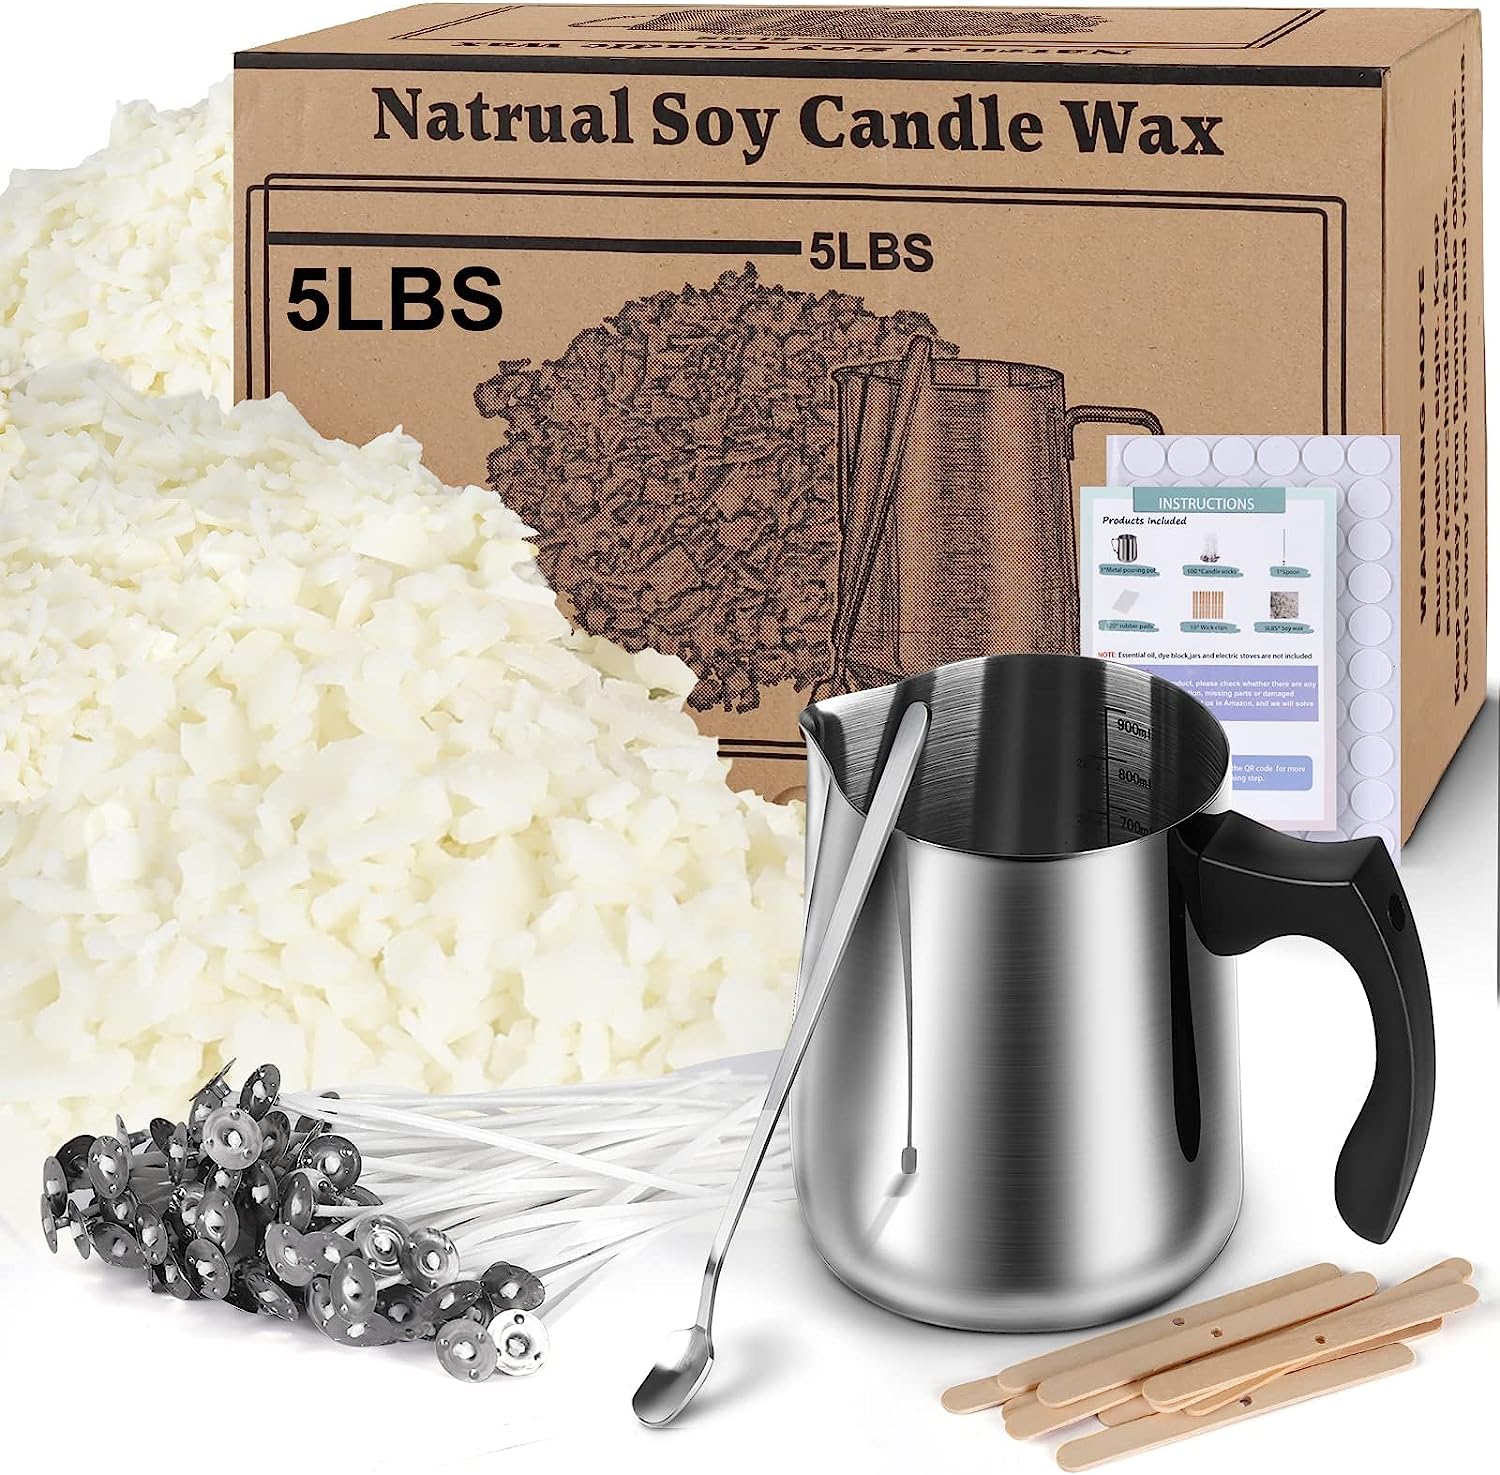 Soy Wax Candle Making Kit Supplies, Natural Candle Wax [...]